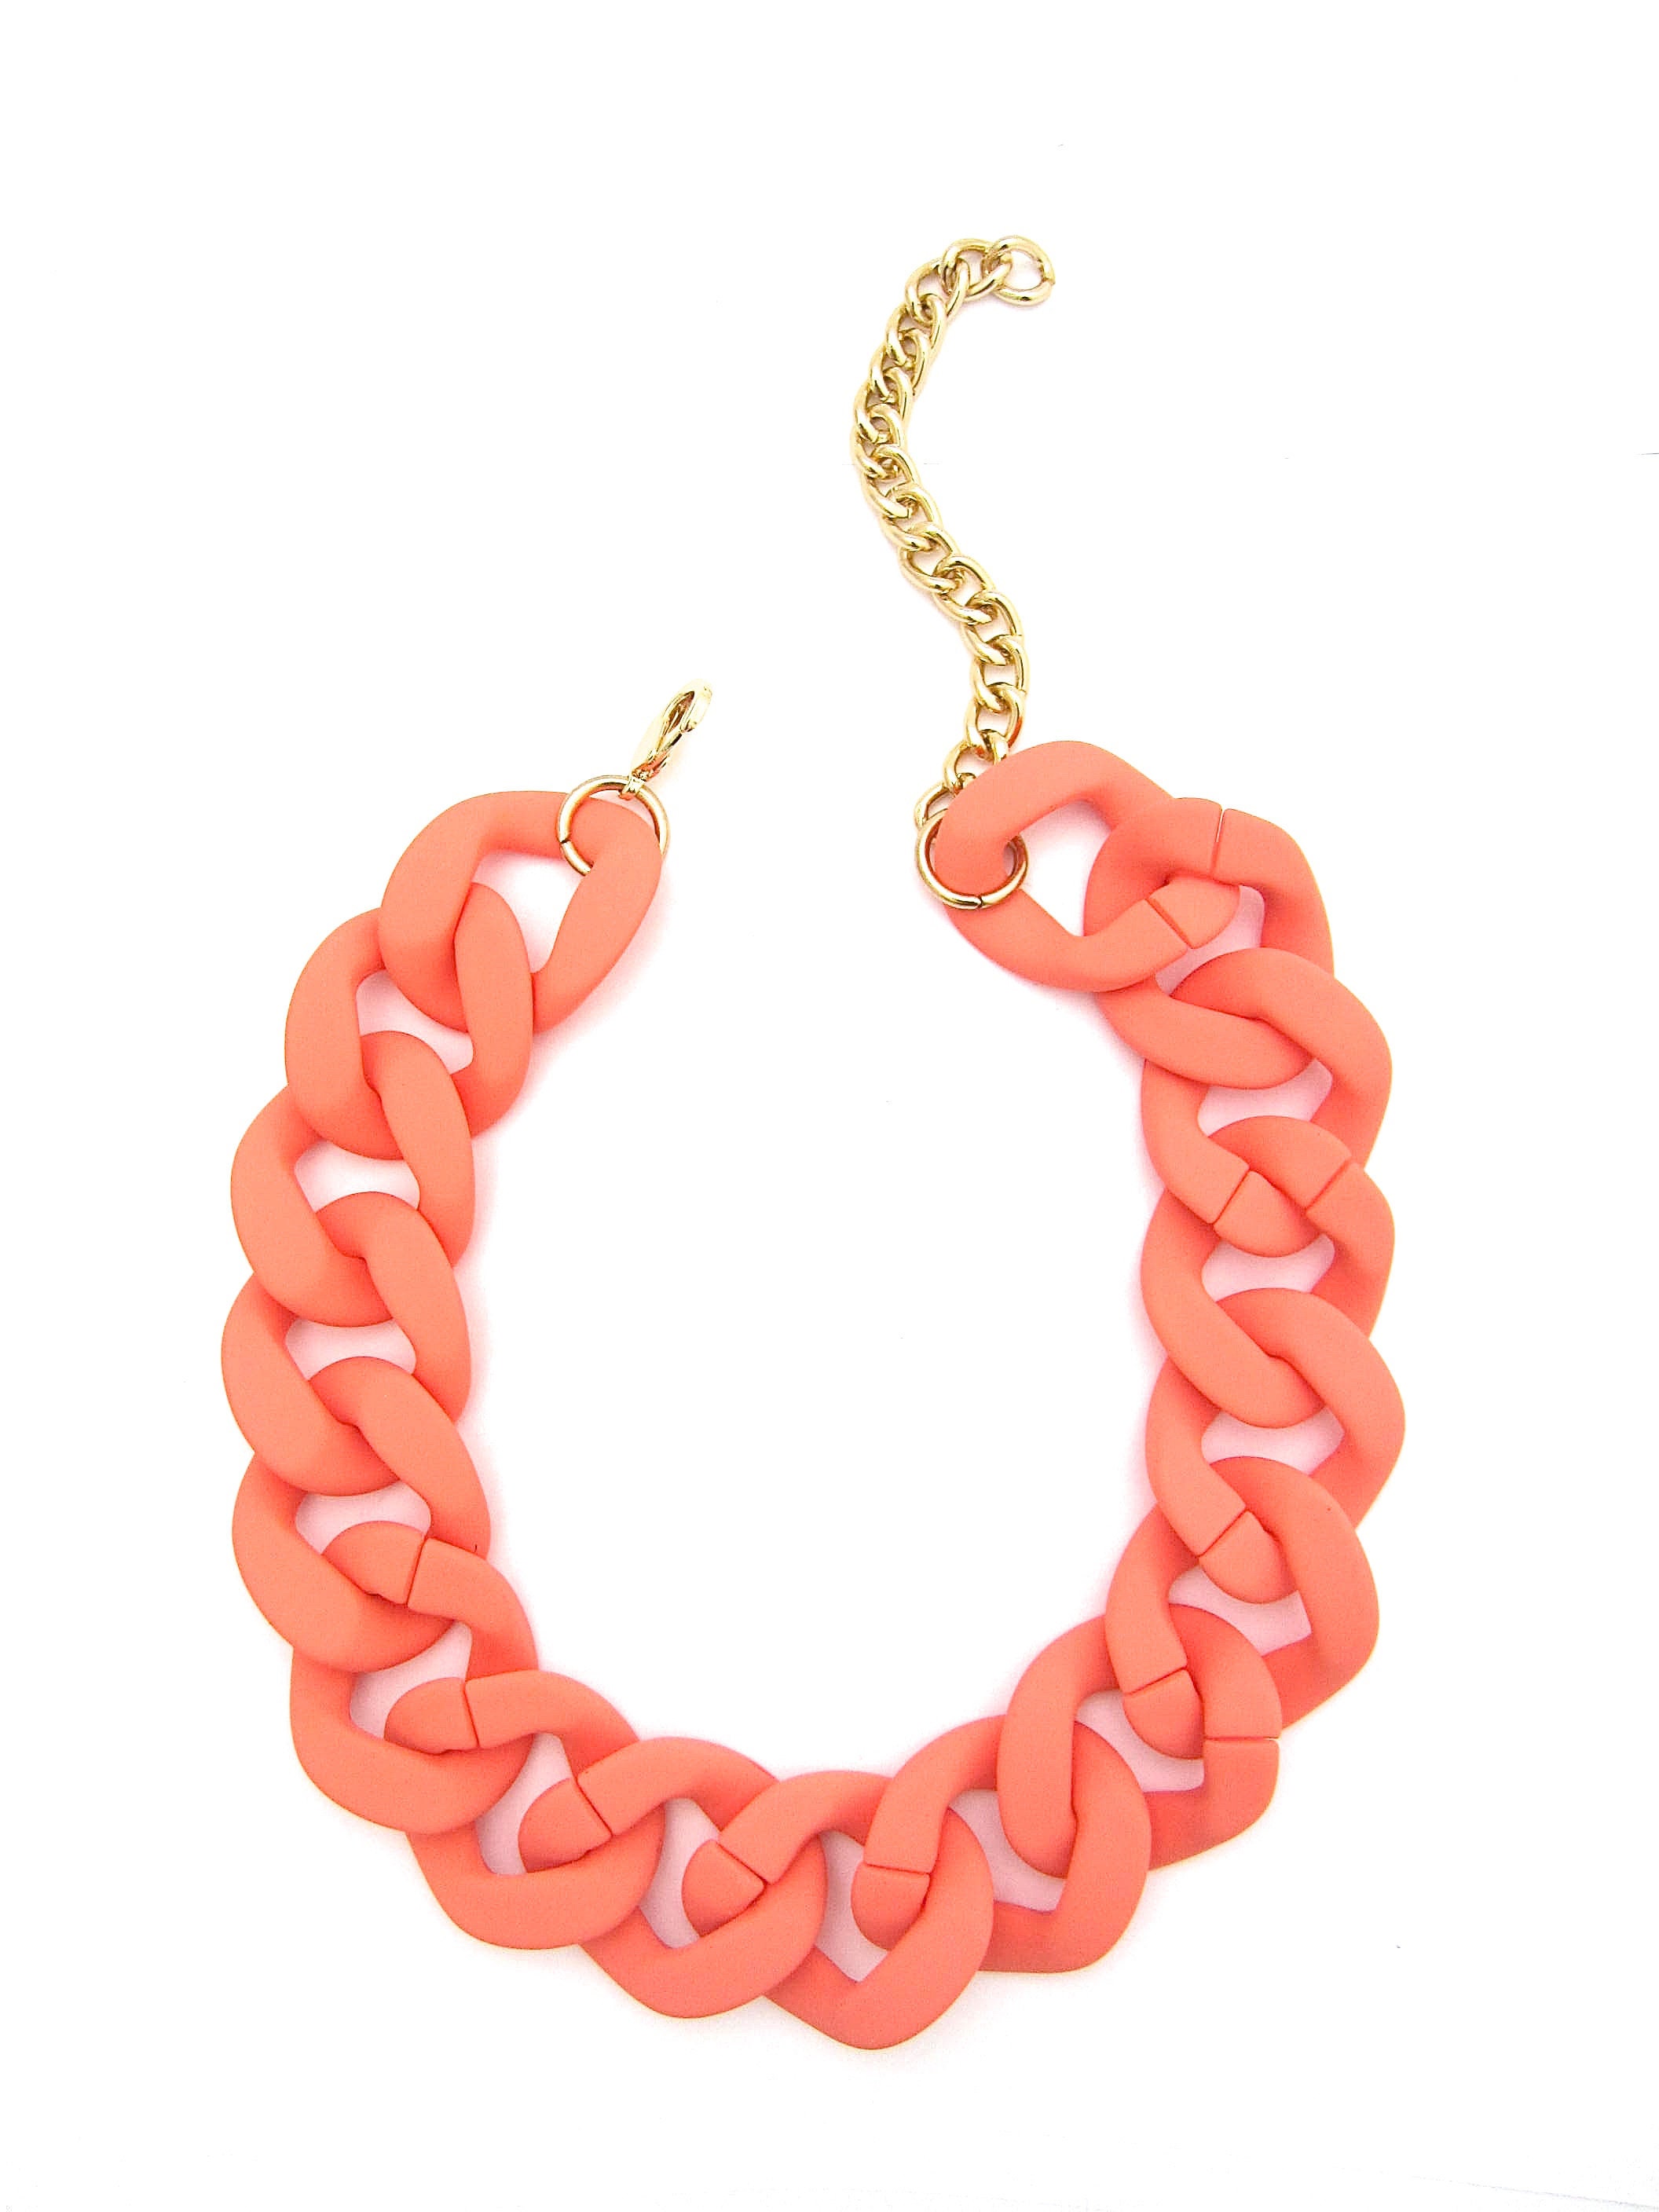 Chunky Coral Necklace, Peach Orange Statement Chain, Large Matte Link Customized Jewelry, Acrylic Resin Chain